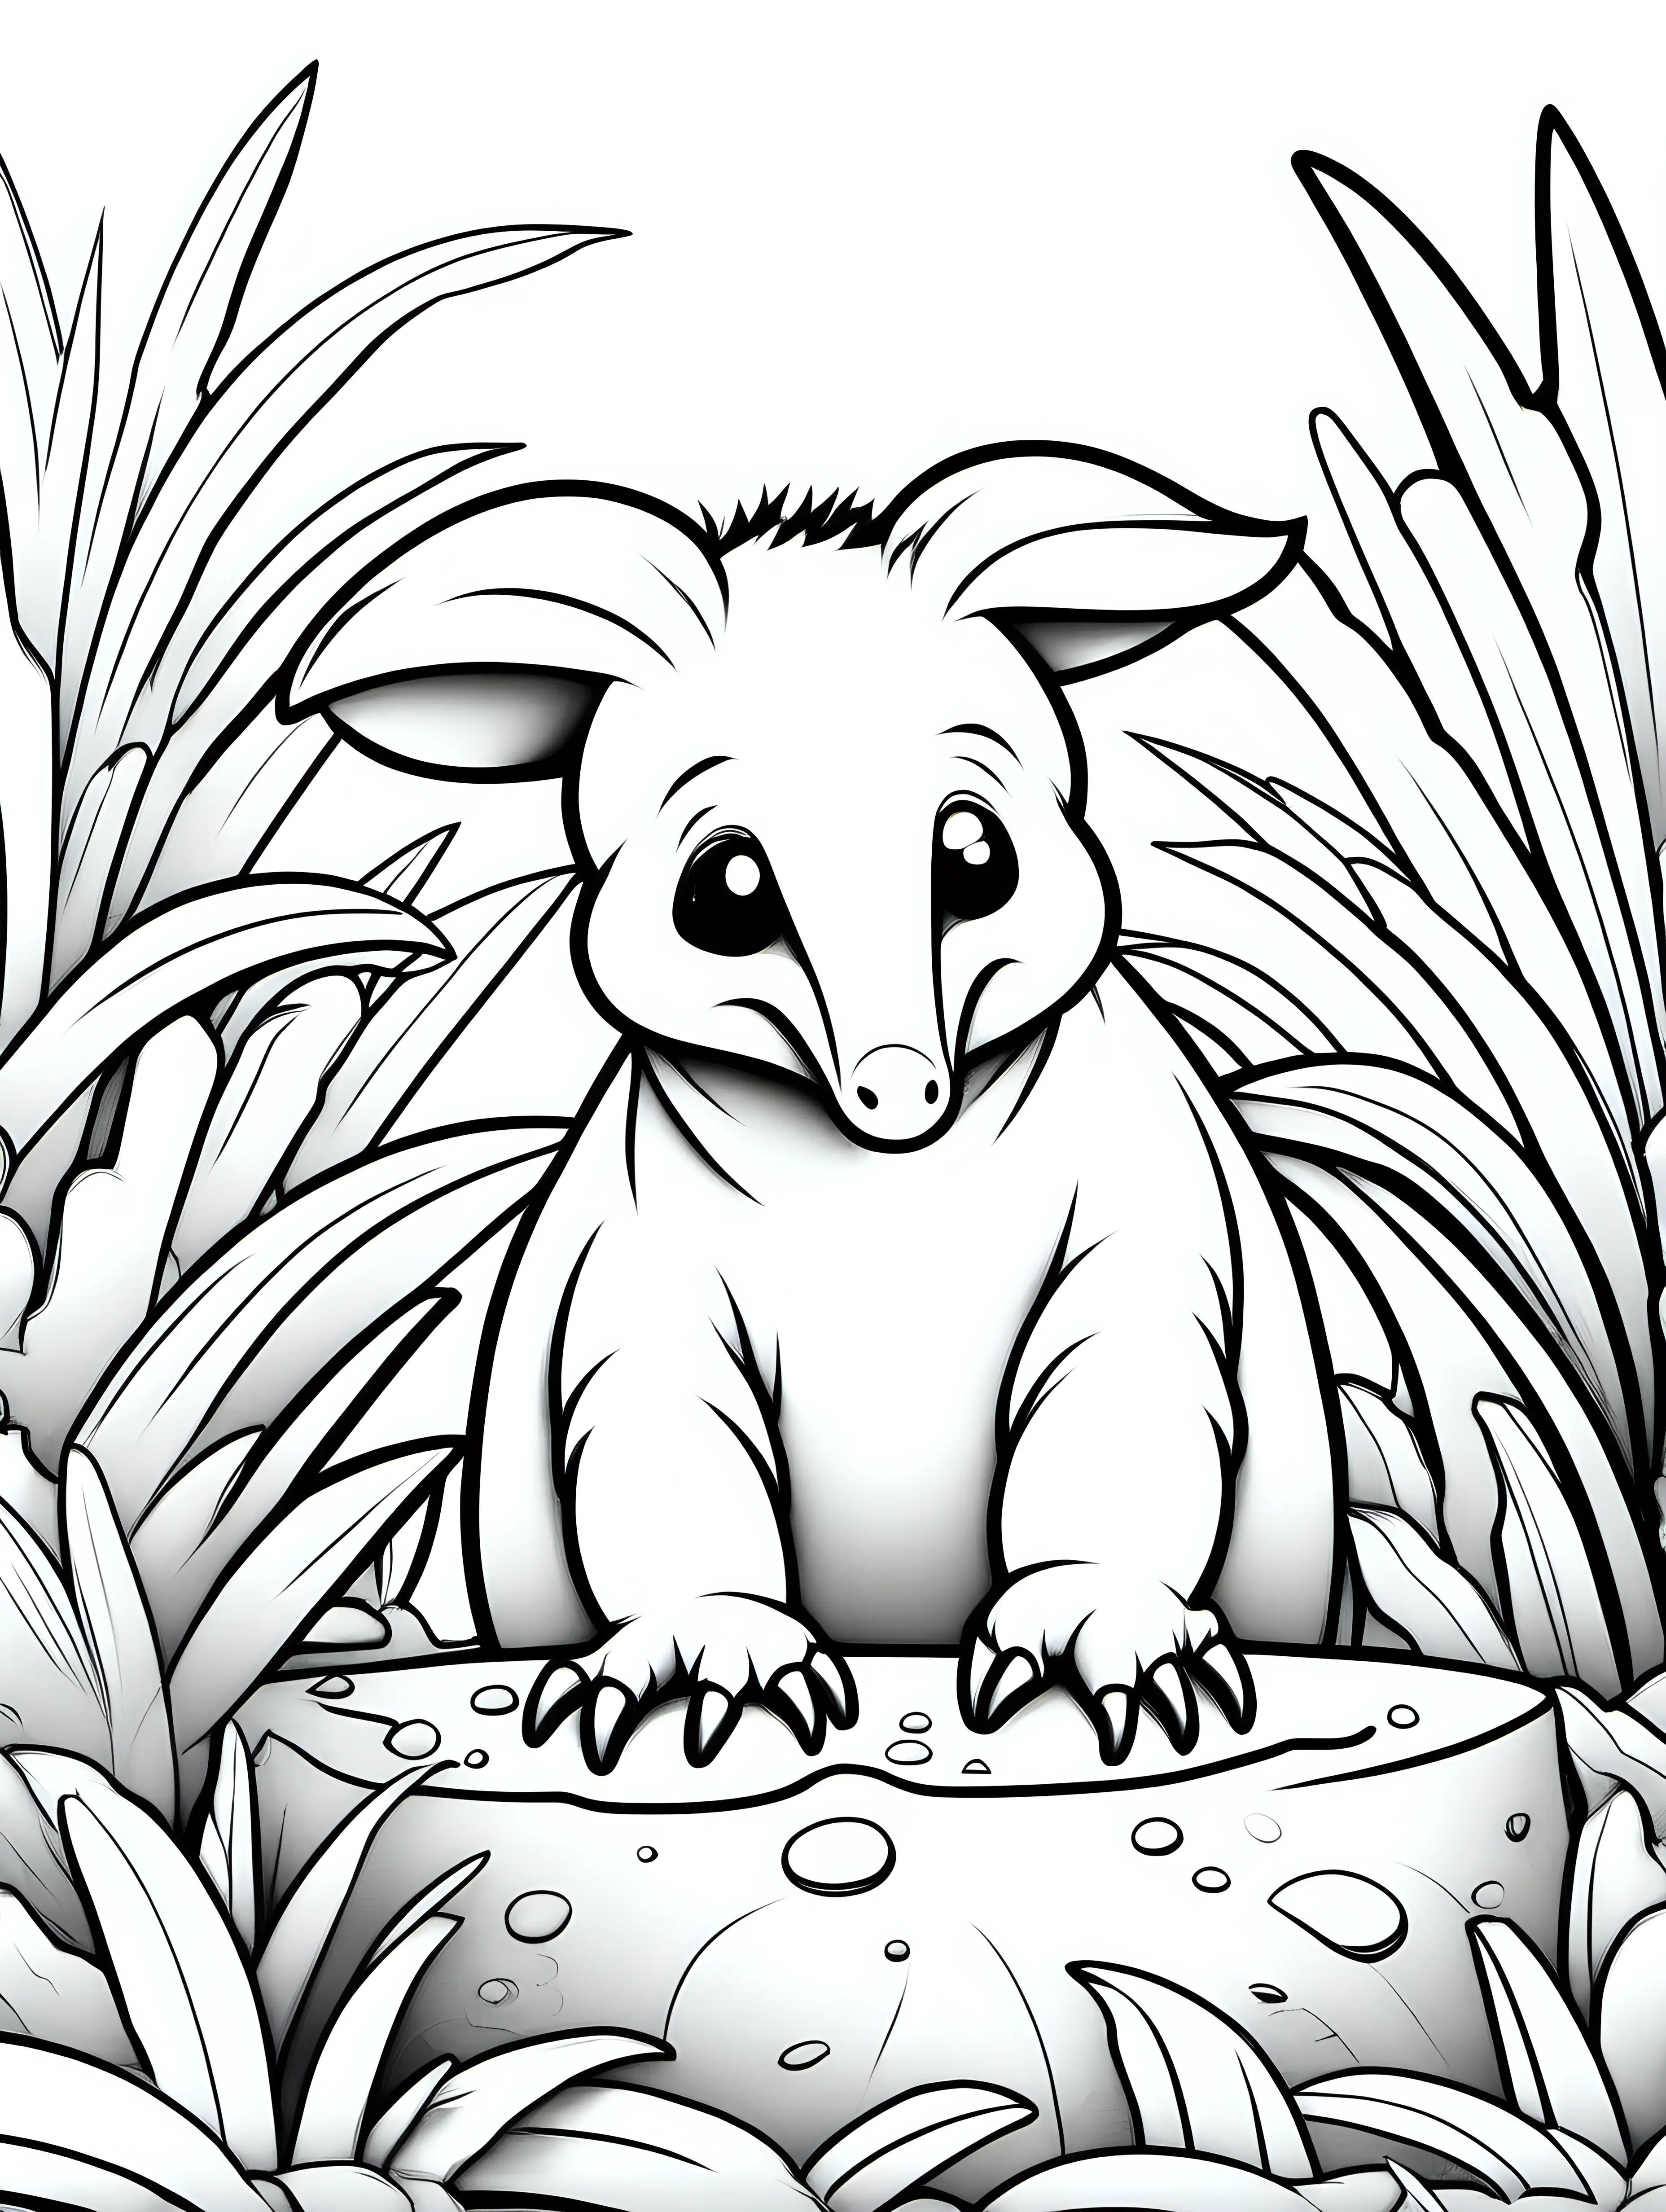 Adorable Anteater Cub Enjoying Ant Feast in Cartoon Coloring Book